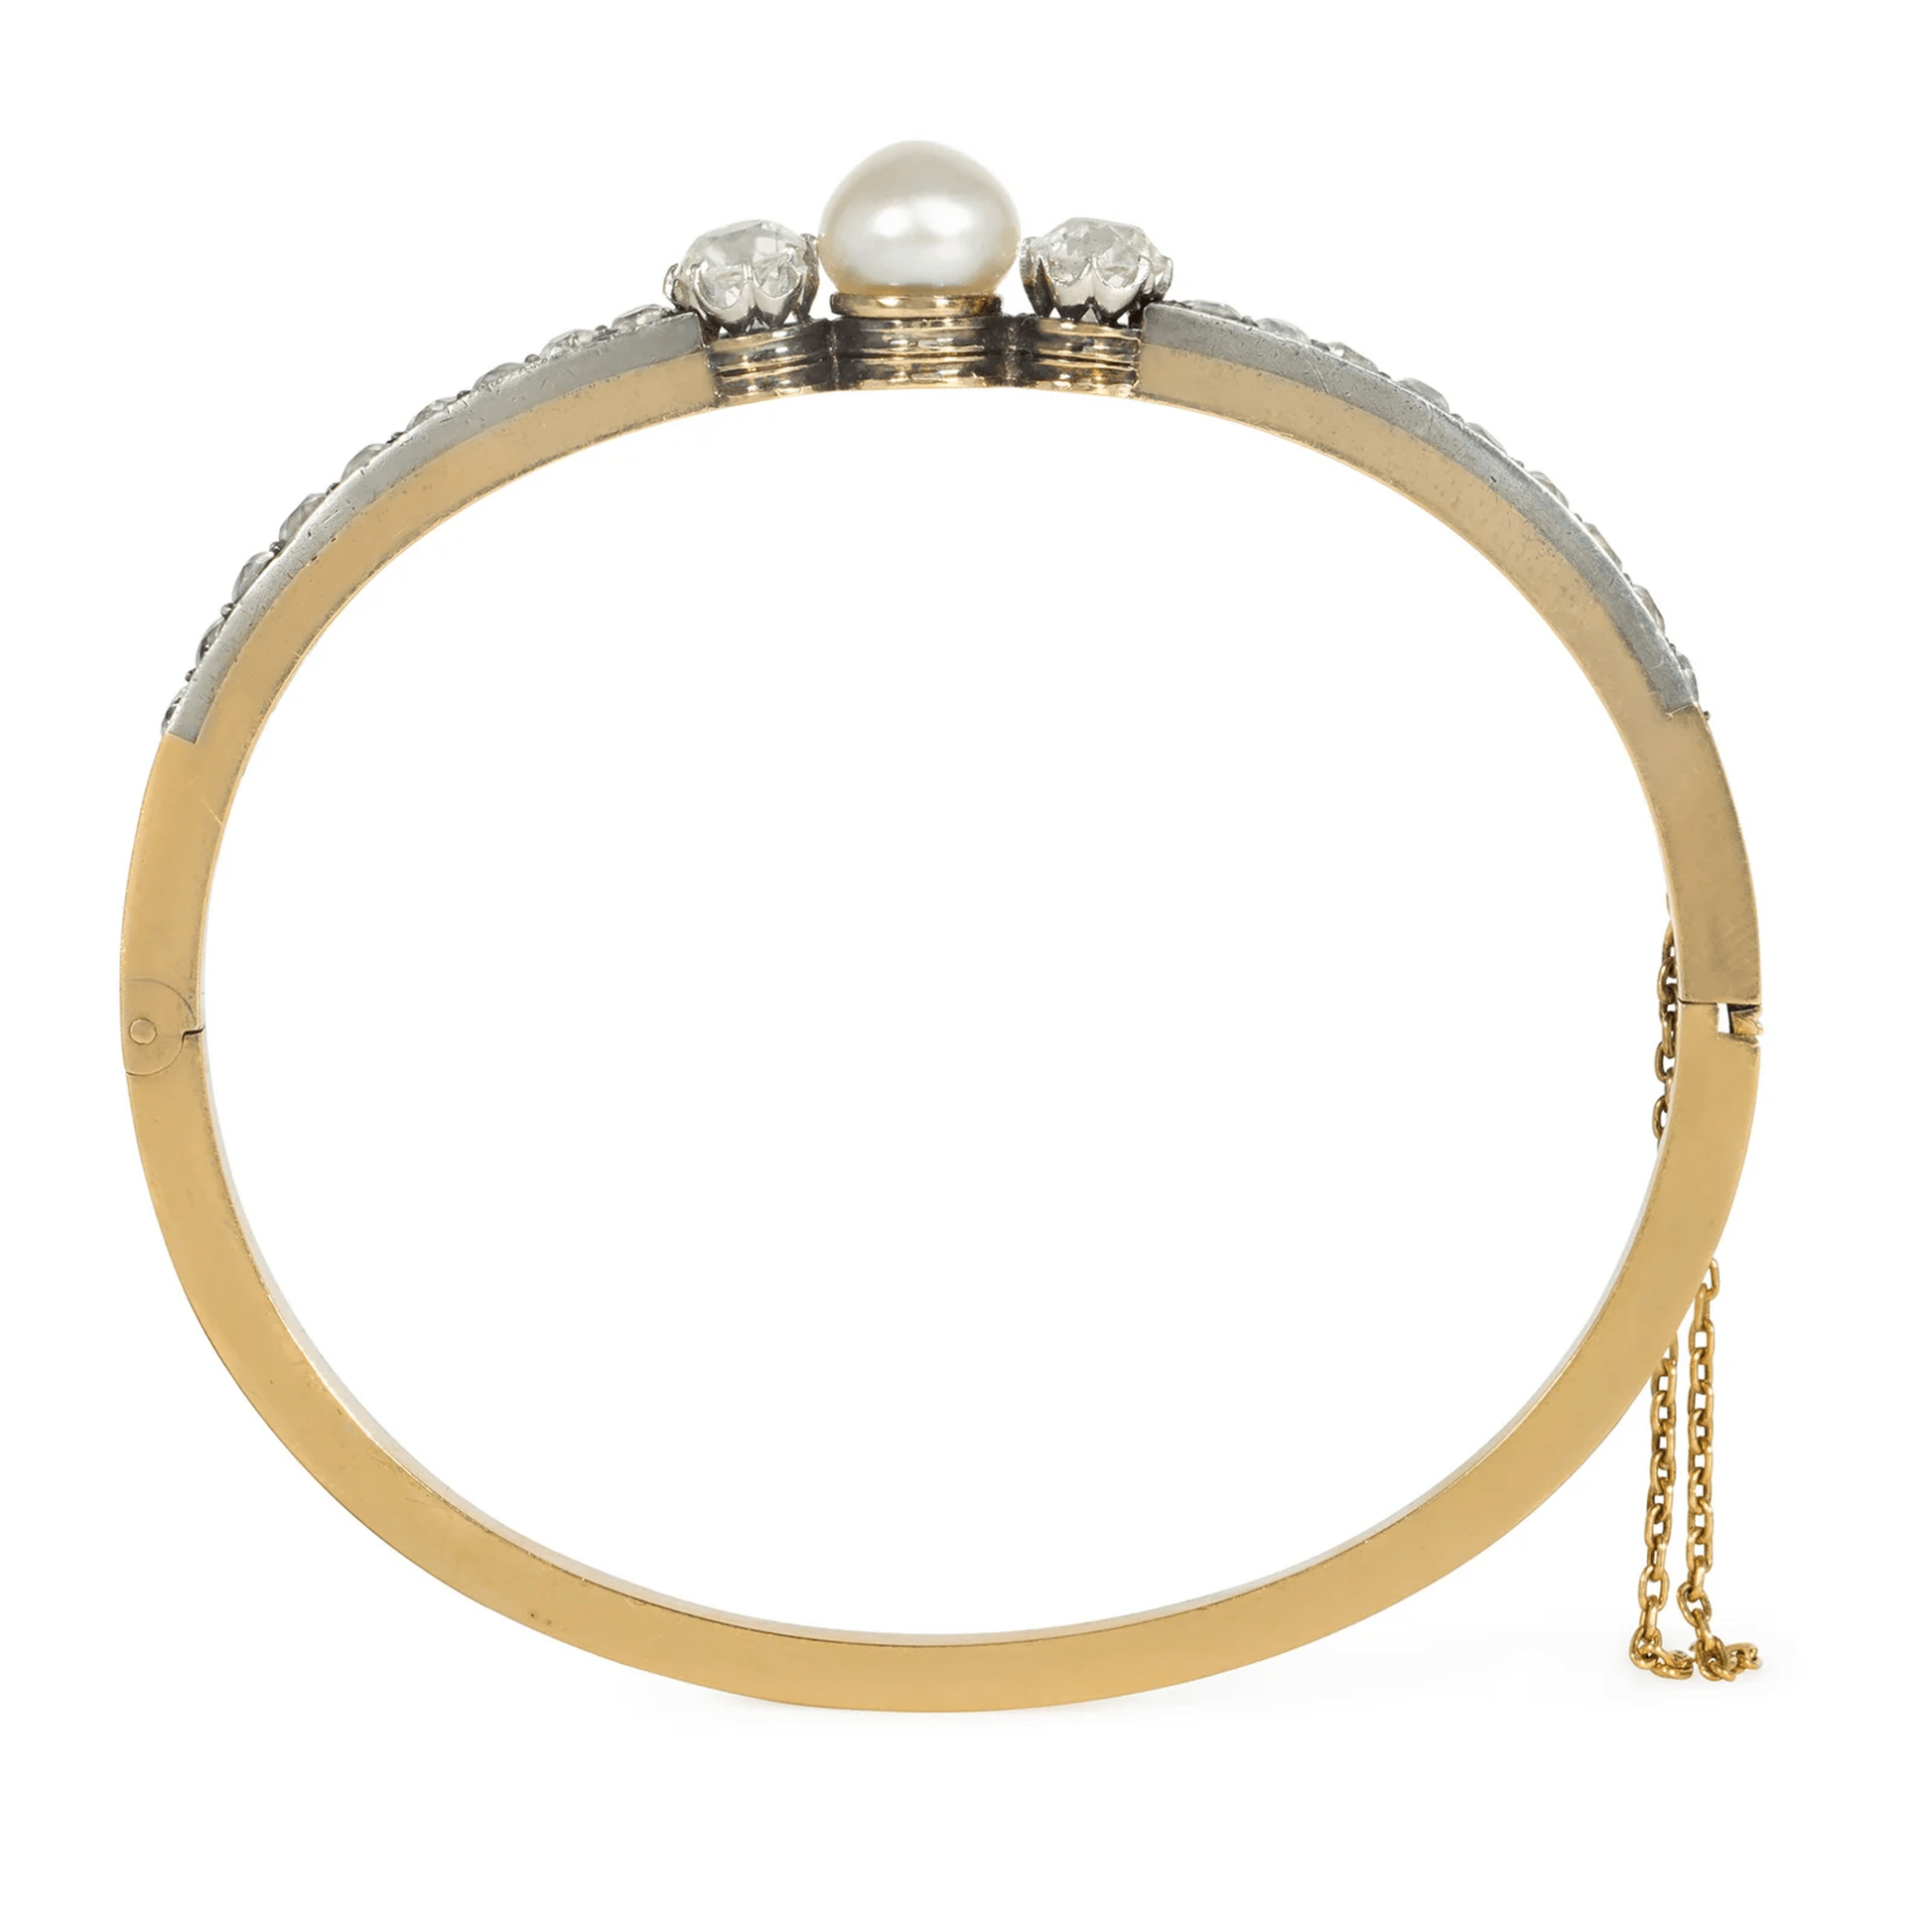 French Antique Silver & 18KT Yellow Gold Diamond & Natural Pearl Bangle Bracelet profile